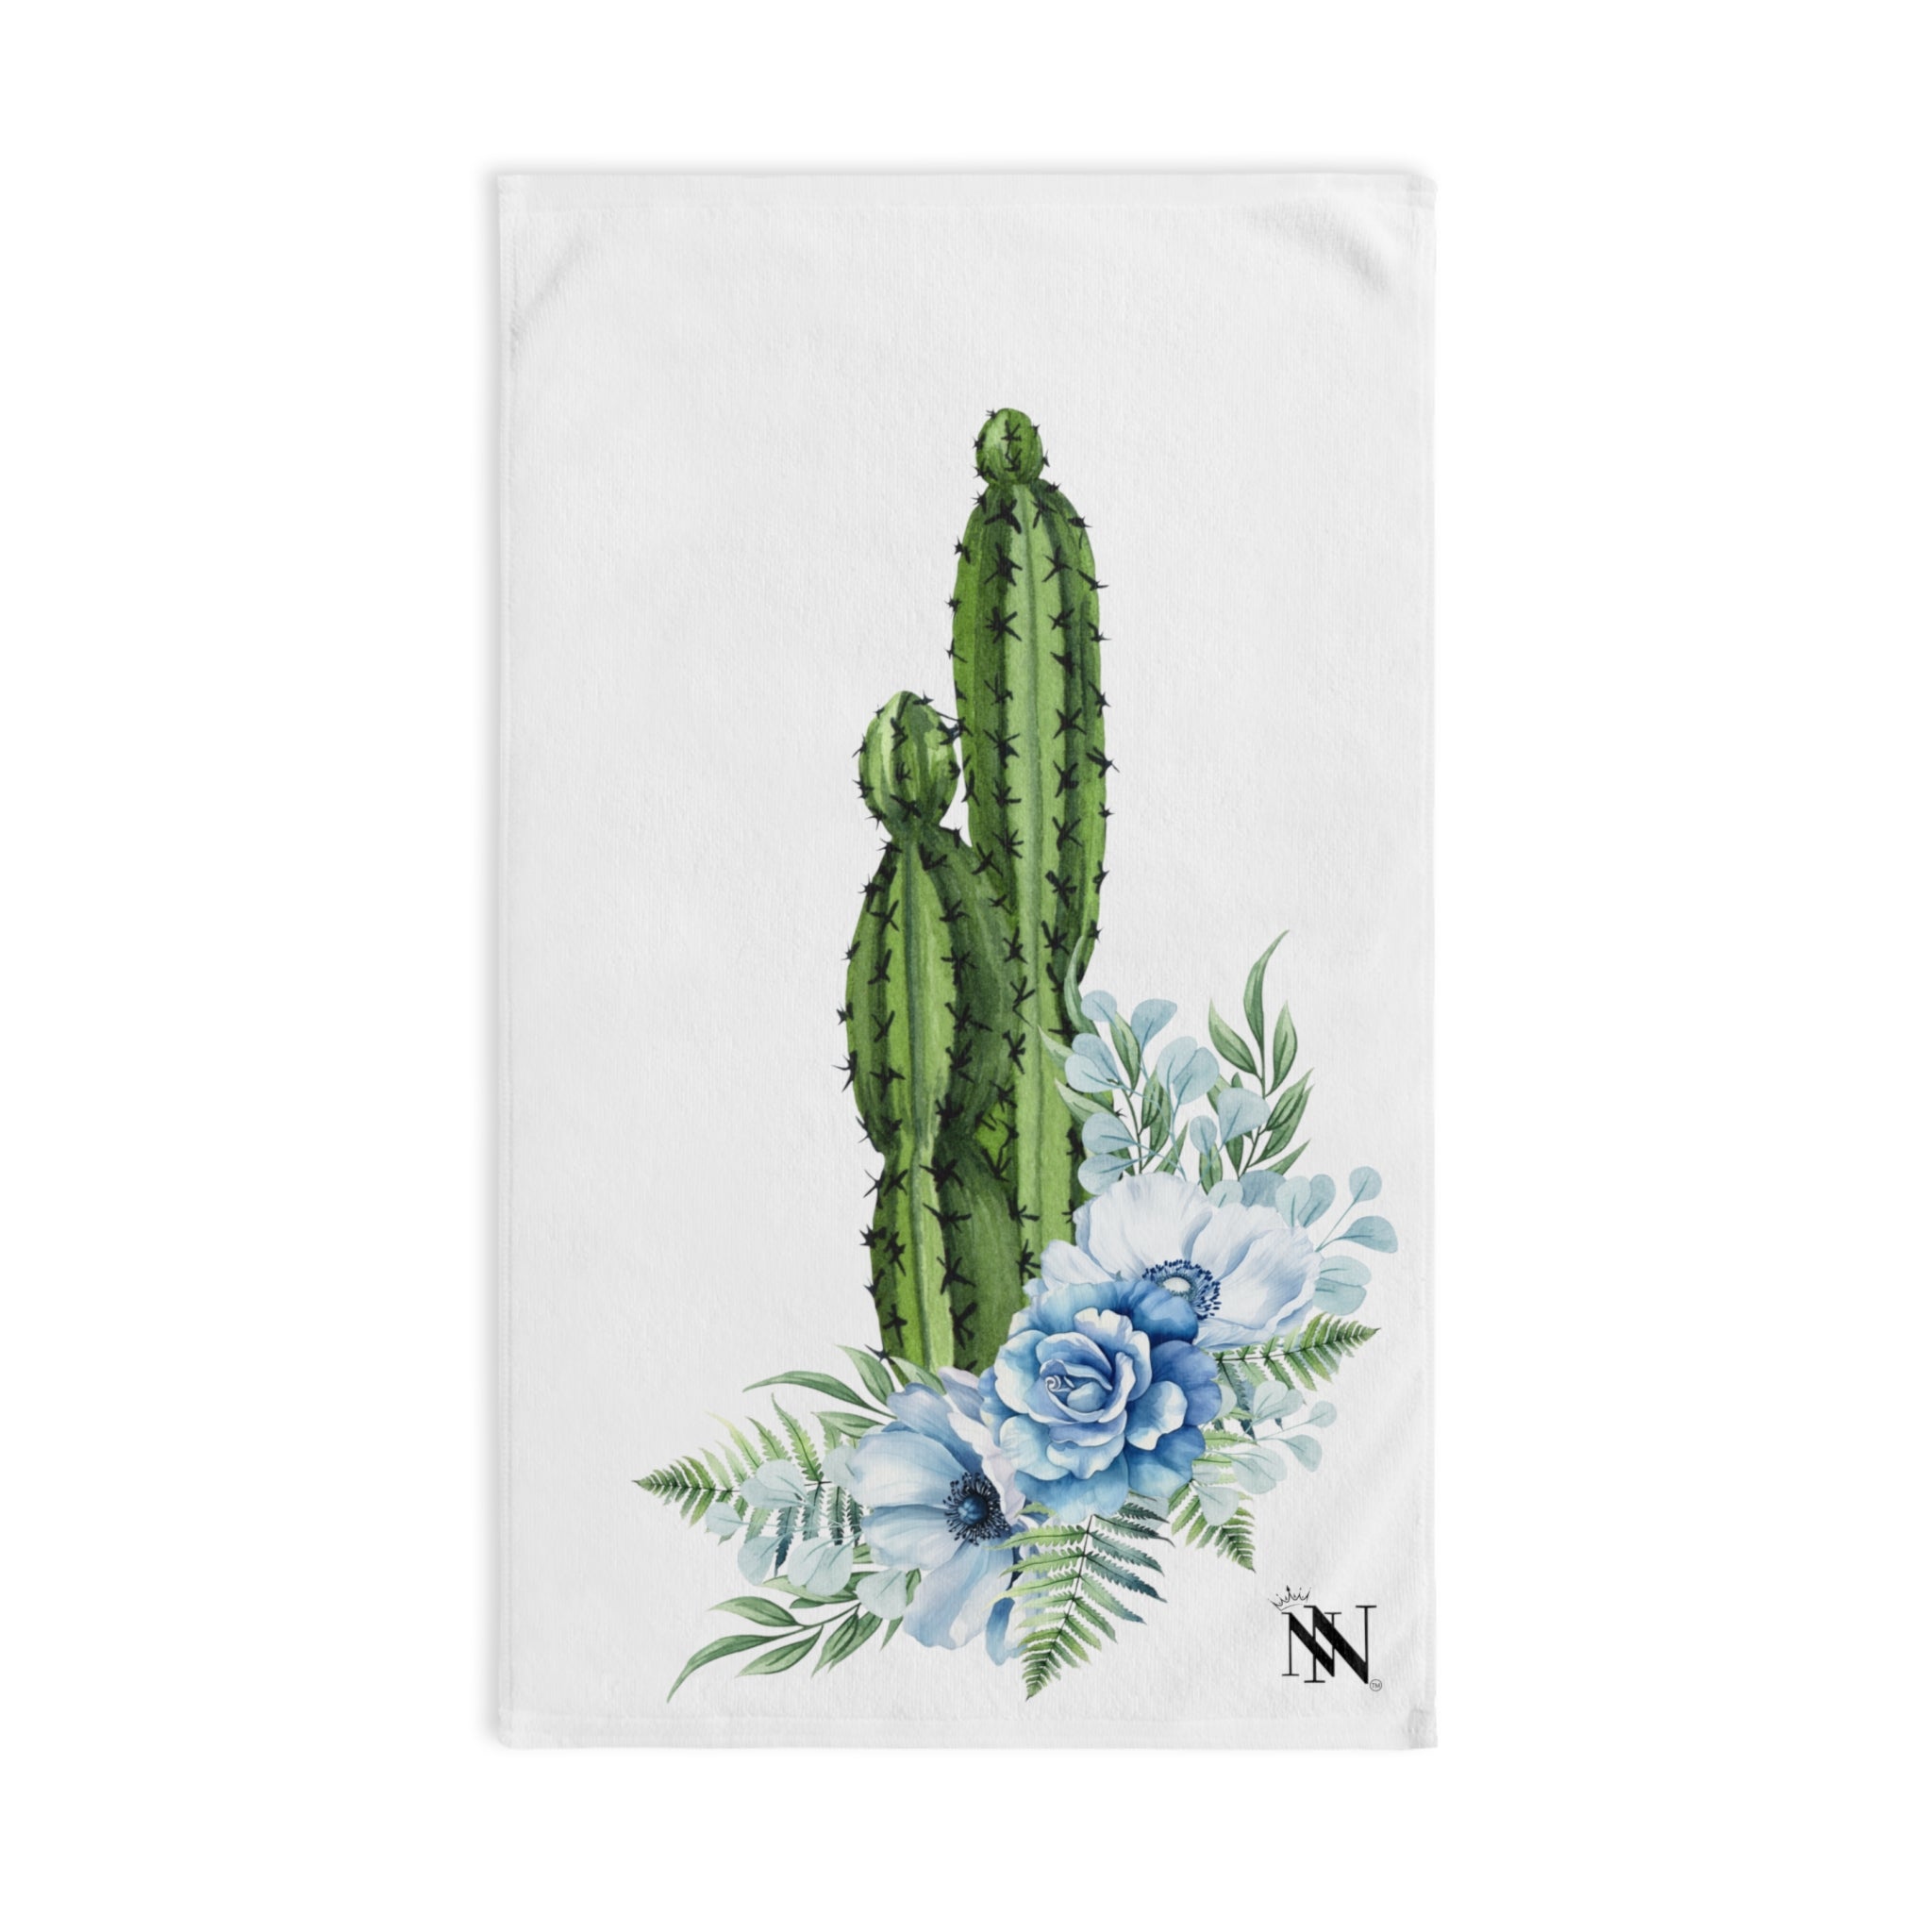 Cactus Rose Vows White | Funny Gifts for Men - Gifts for Him - Birthday Gifts for Men, Him, Her, Husband, Boyfriend, Girlfriend, New Couple Gifts, Fathers & Valentines Day Gifts, Christmas Gifts NECTAR NAPKINS